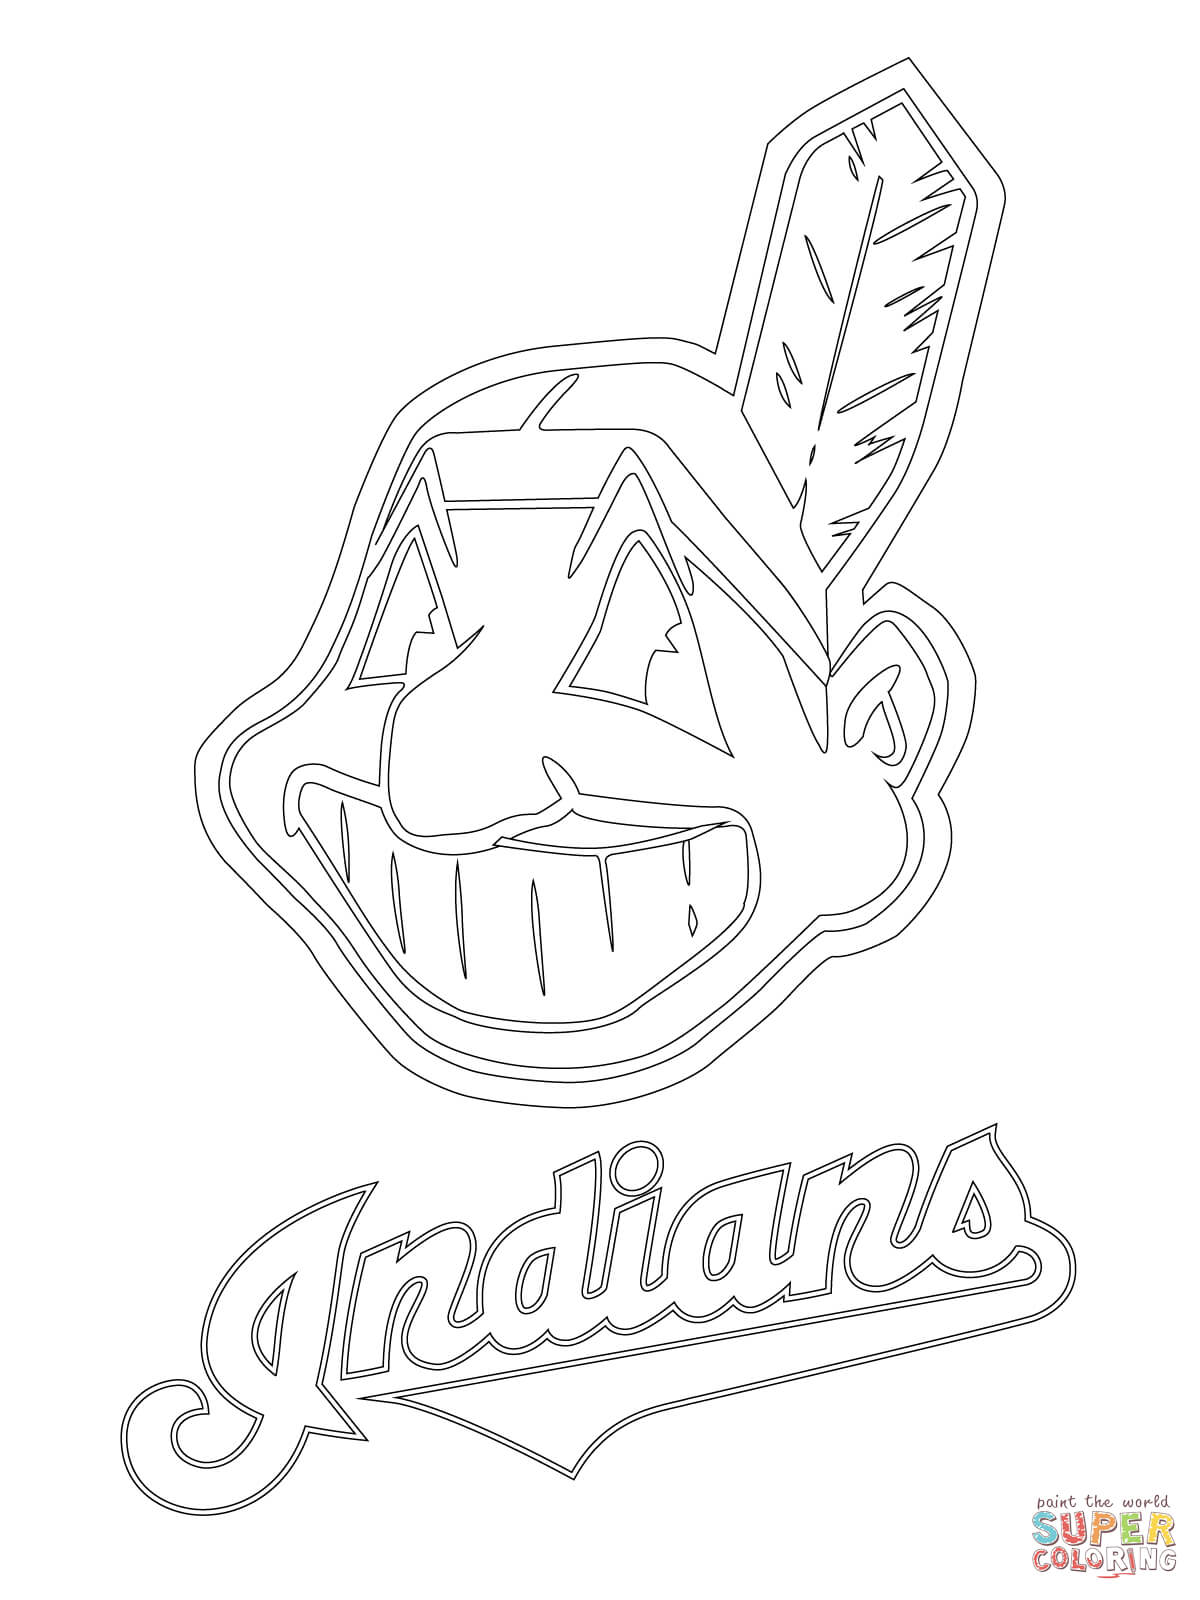 Clevelend Indians Logo coloring page